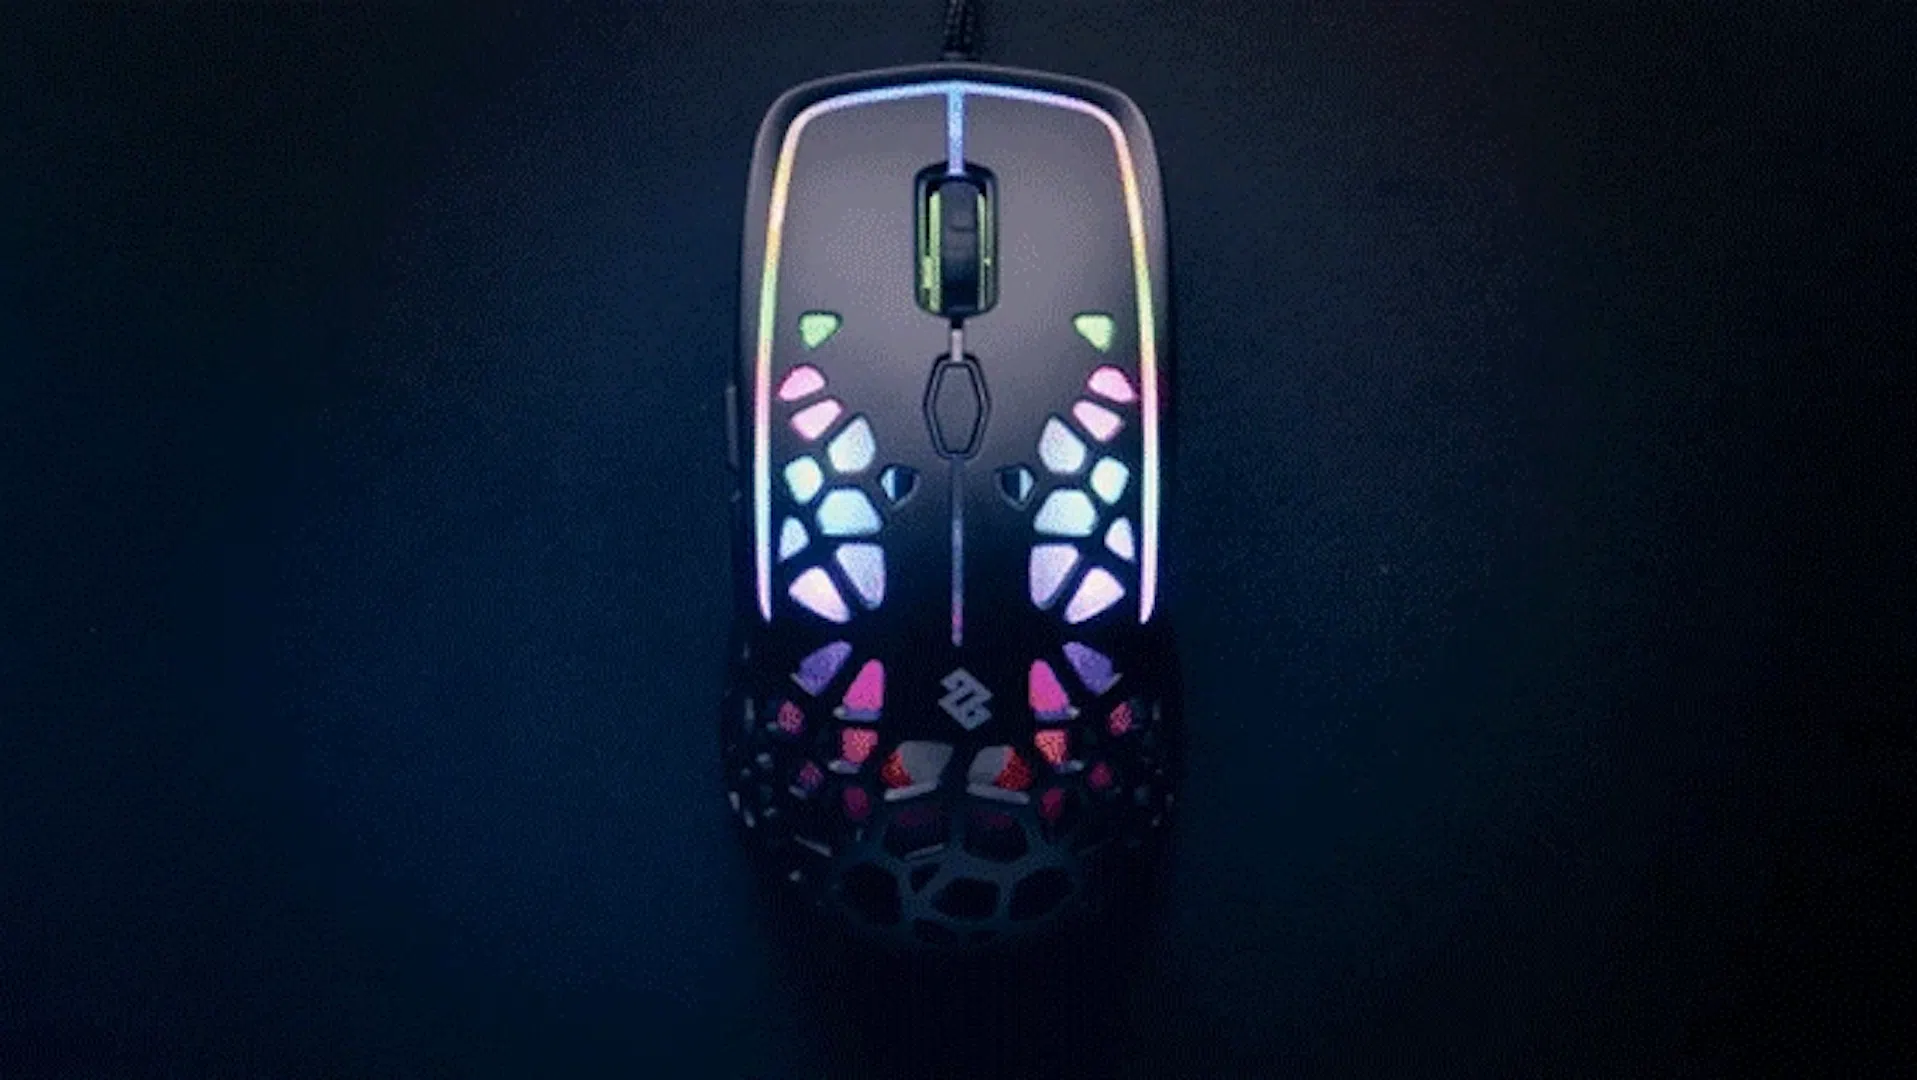 An RGB gaming mouse with pastel-colored breathing effect lighting. | Credit: Kickstarter.